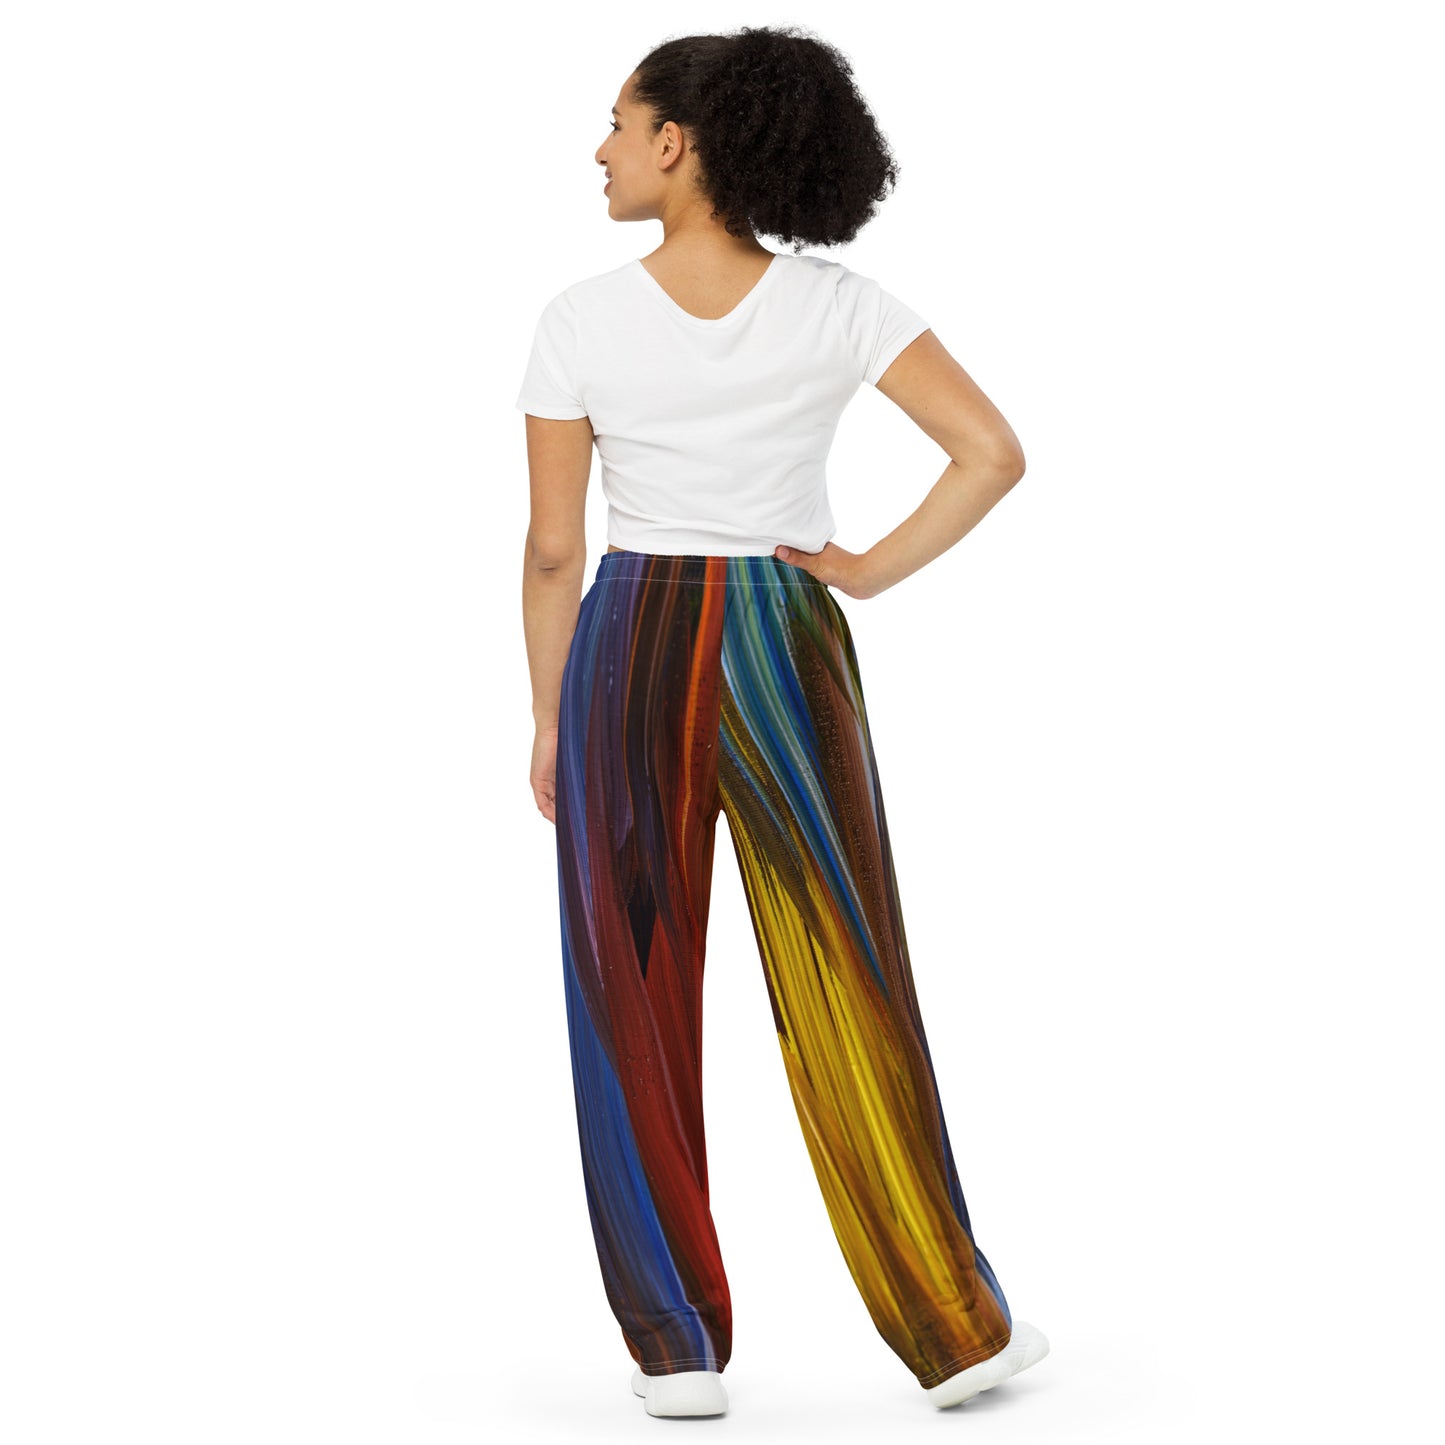 All-over print unisex wide-leg pants with hot colorful design (shipping to US, Canada & Europe)